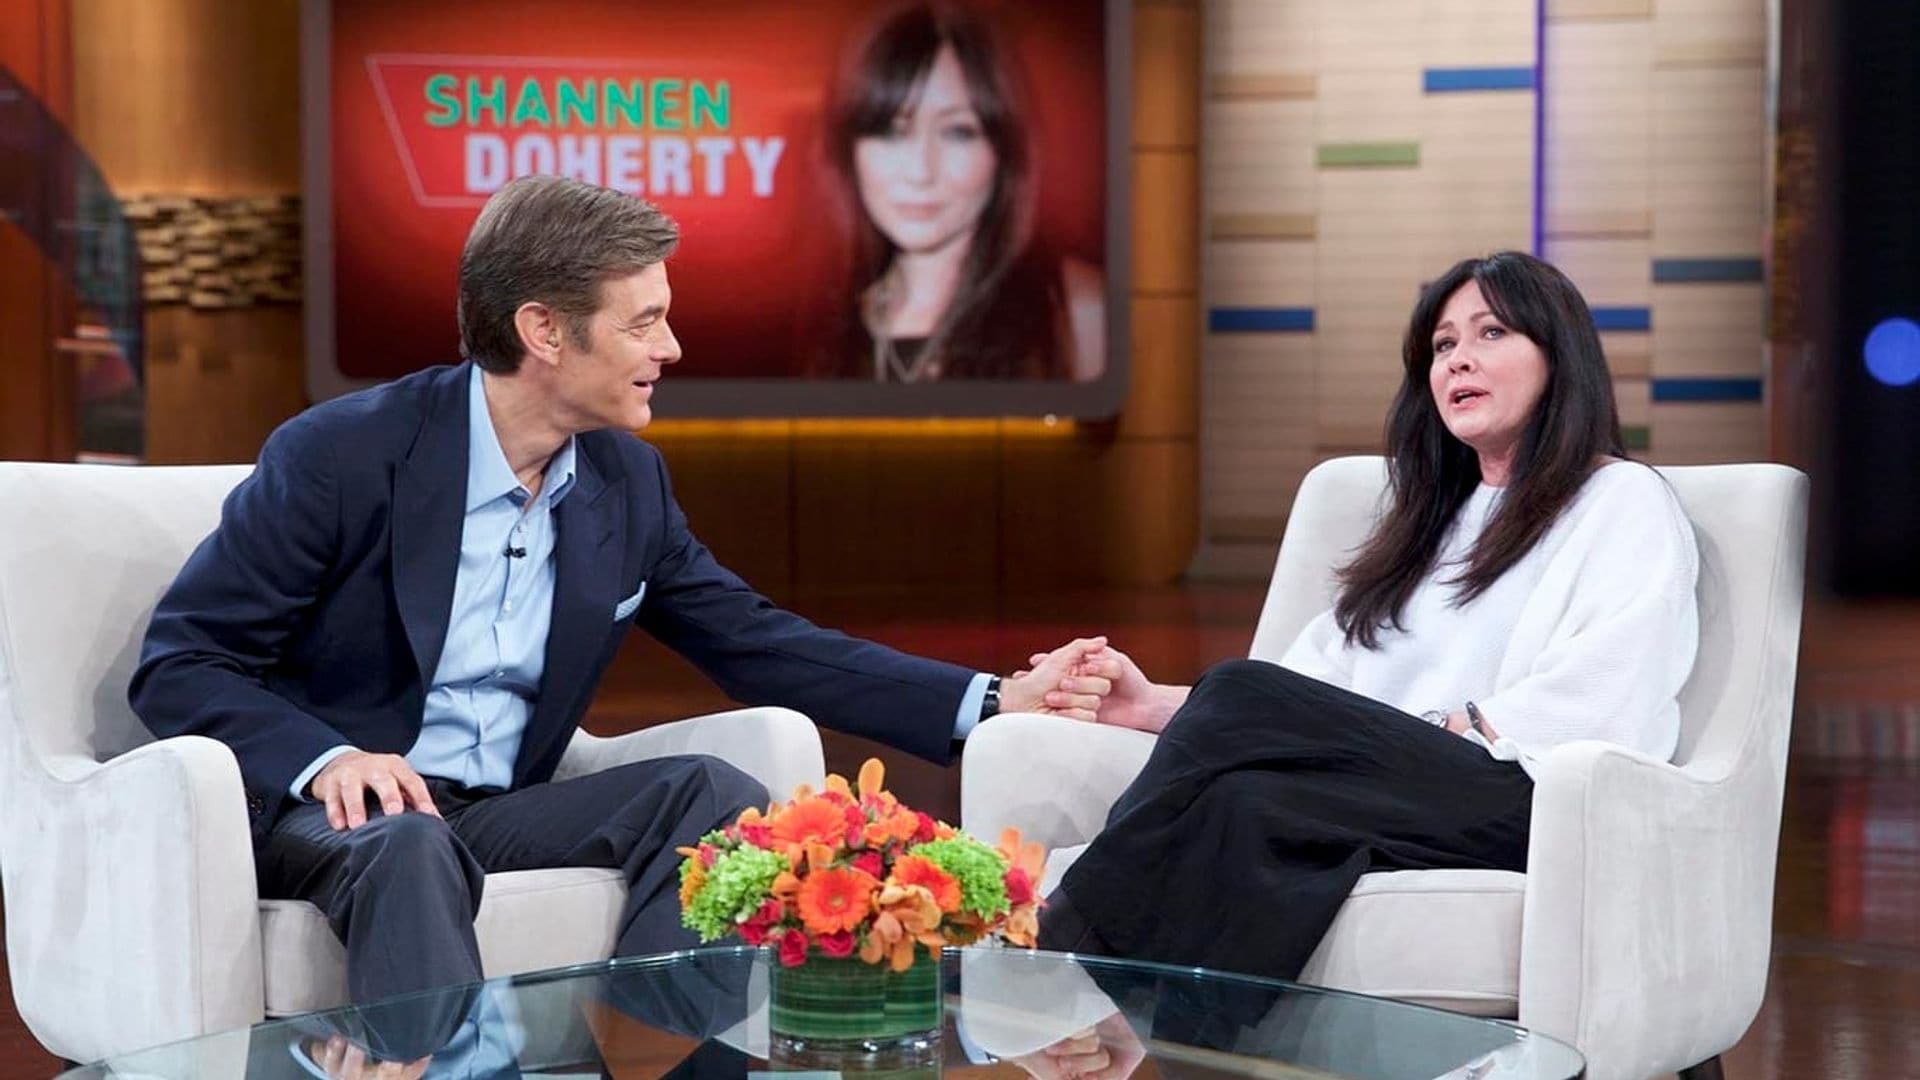 Shannen Doherty opens up in emotional interview about her breast cancer battle